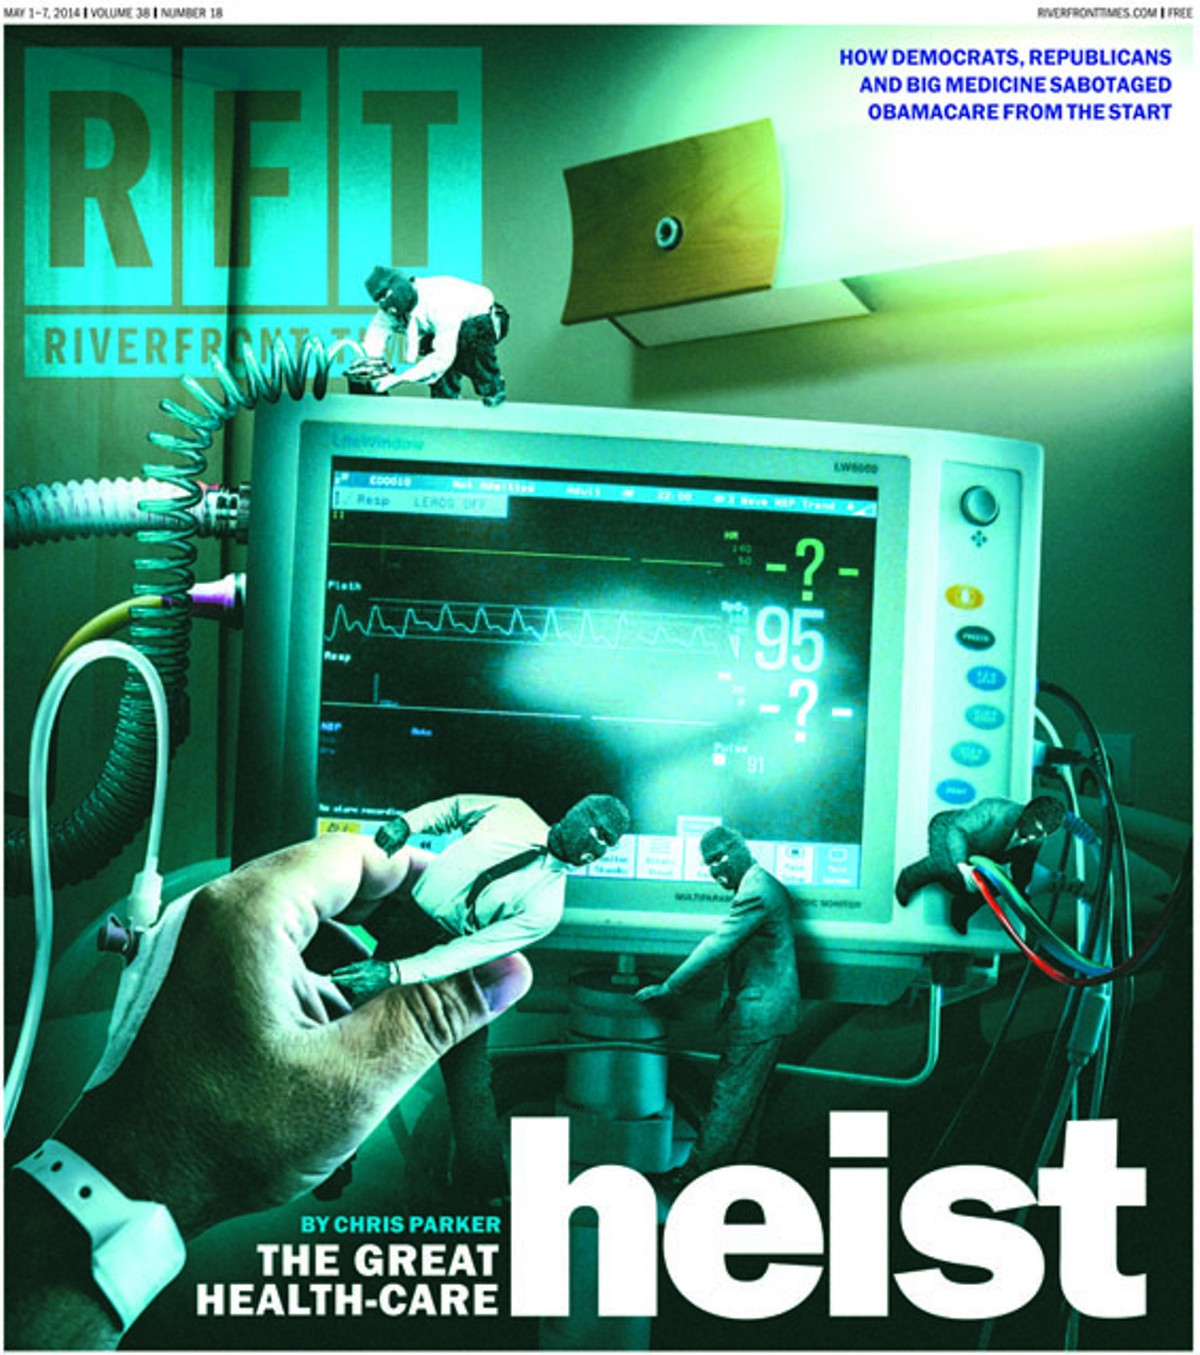 The Cover of the May 1 Print Edition